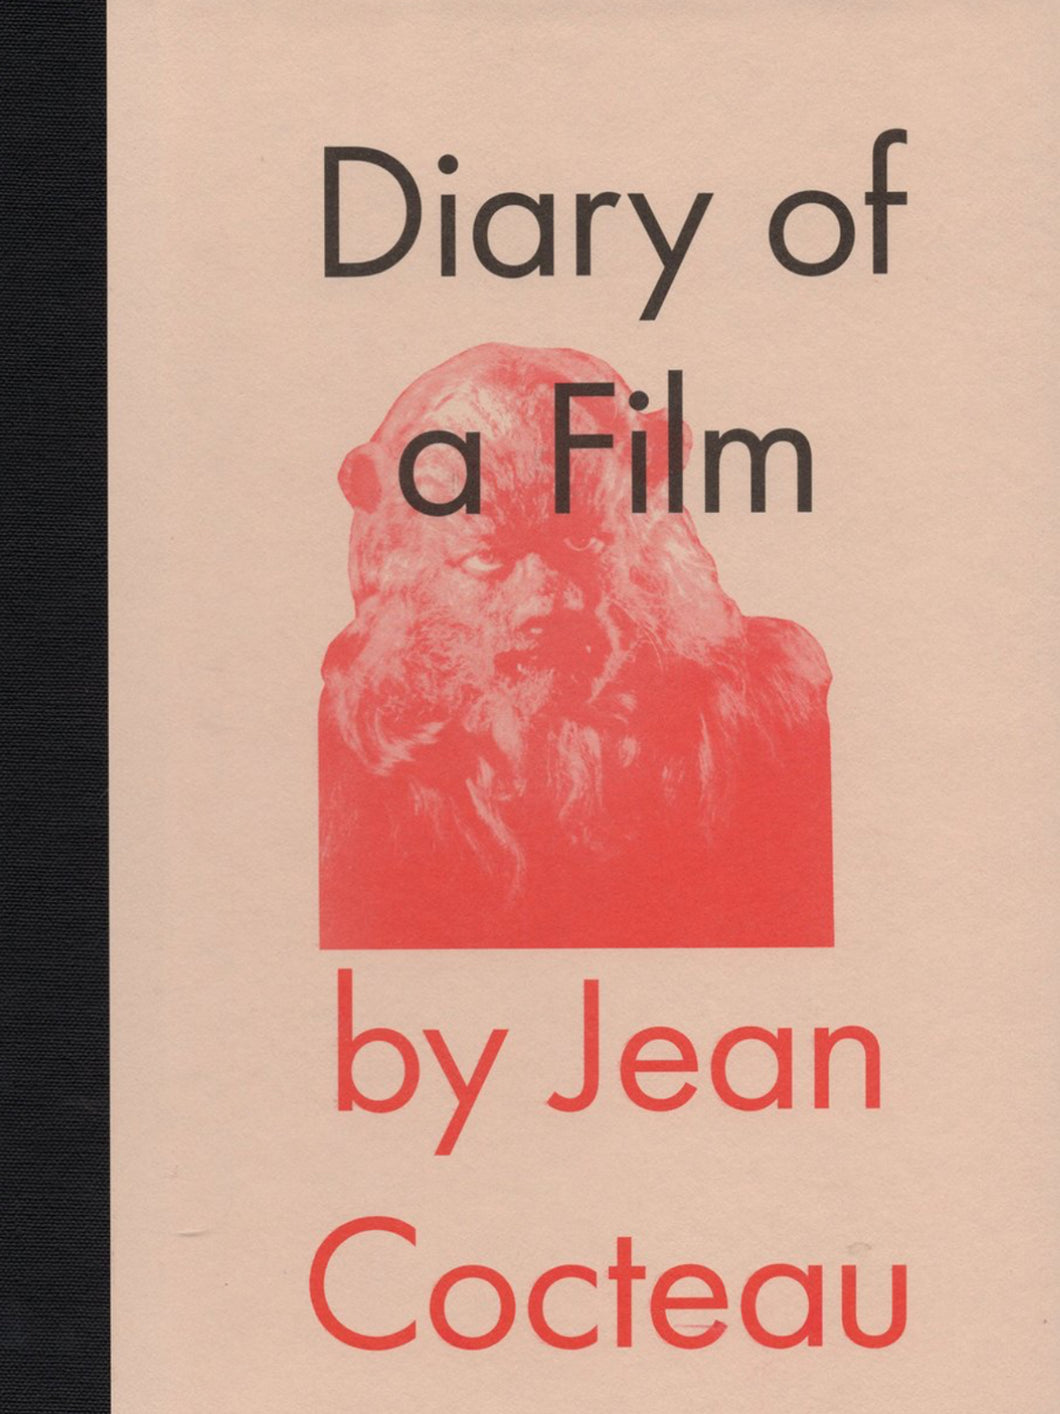 Basket Books: “Diary of a Film” by Jean Cocteau